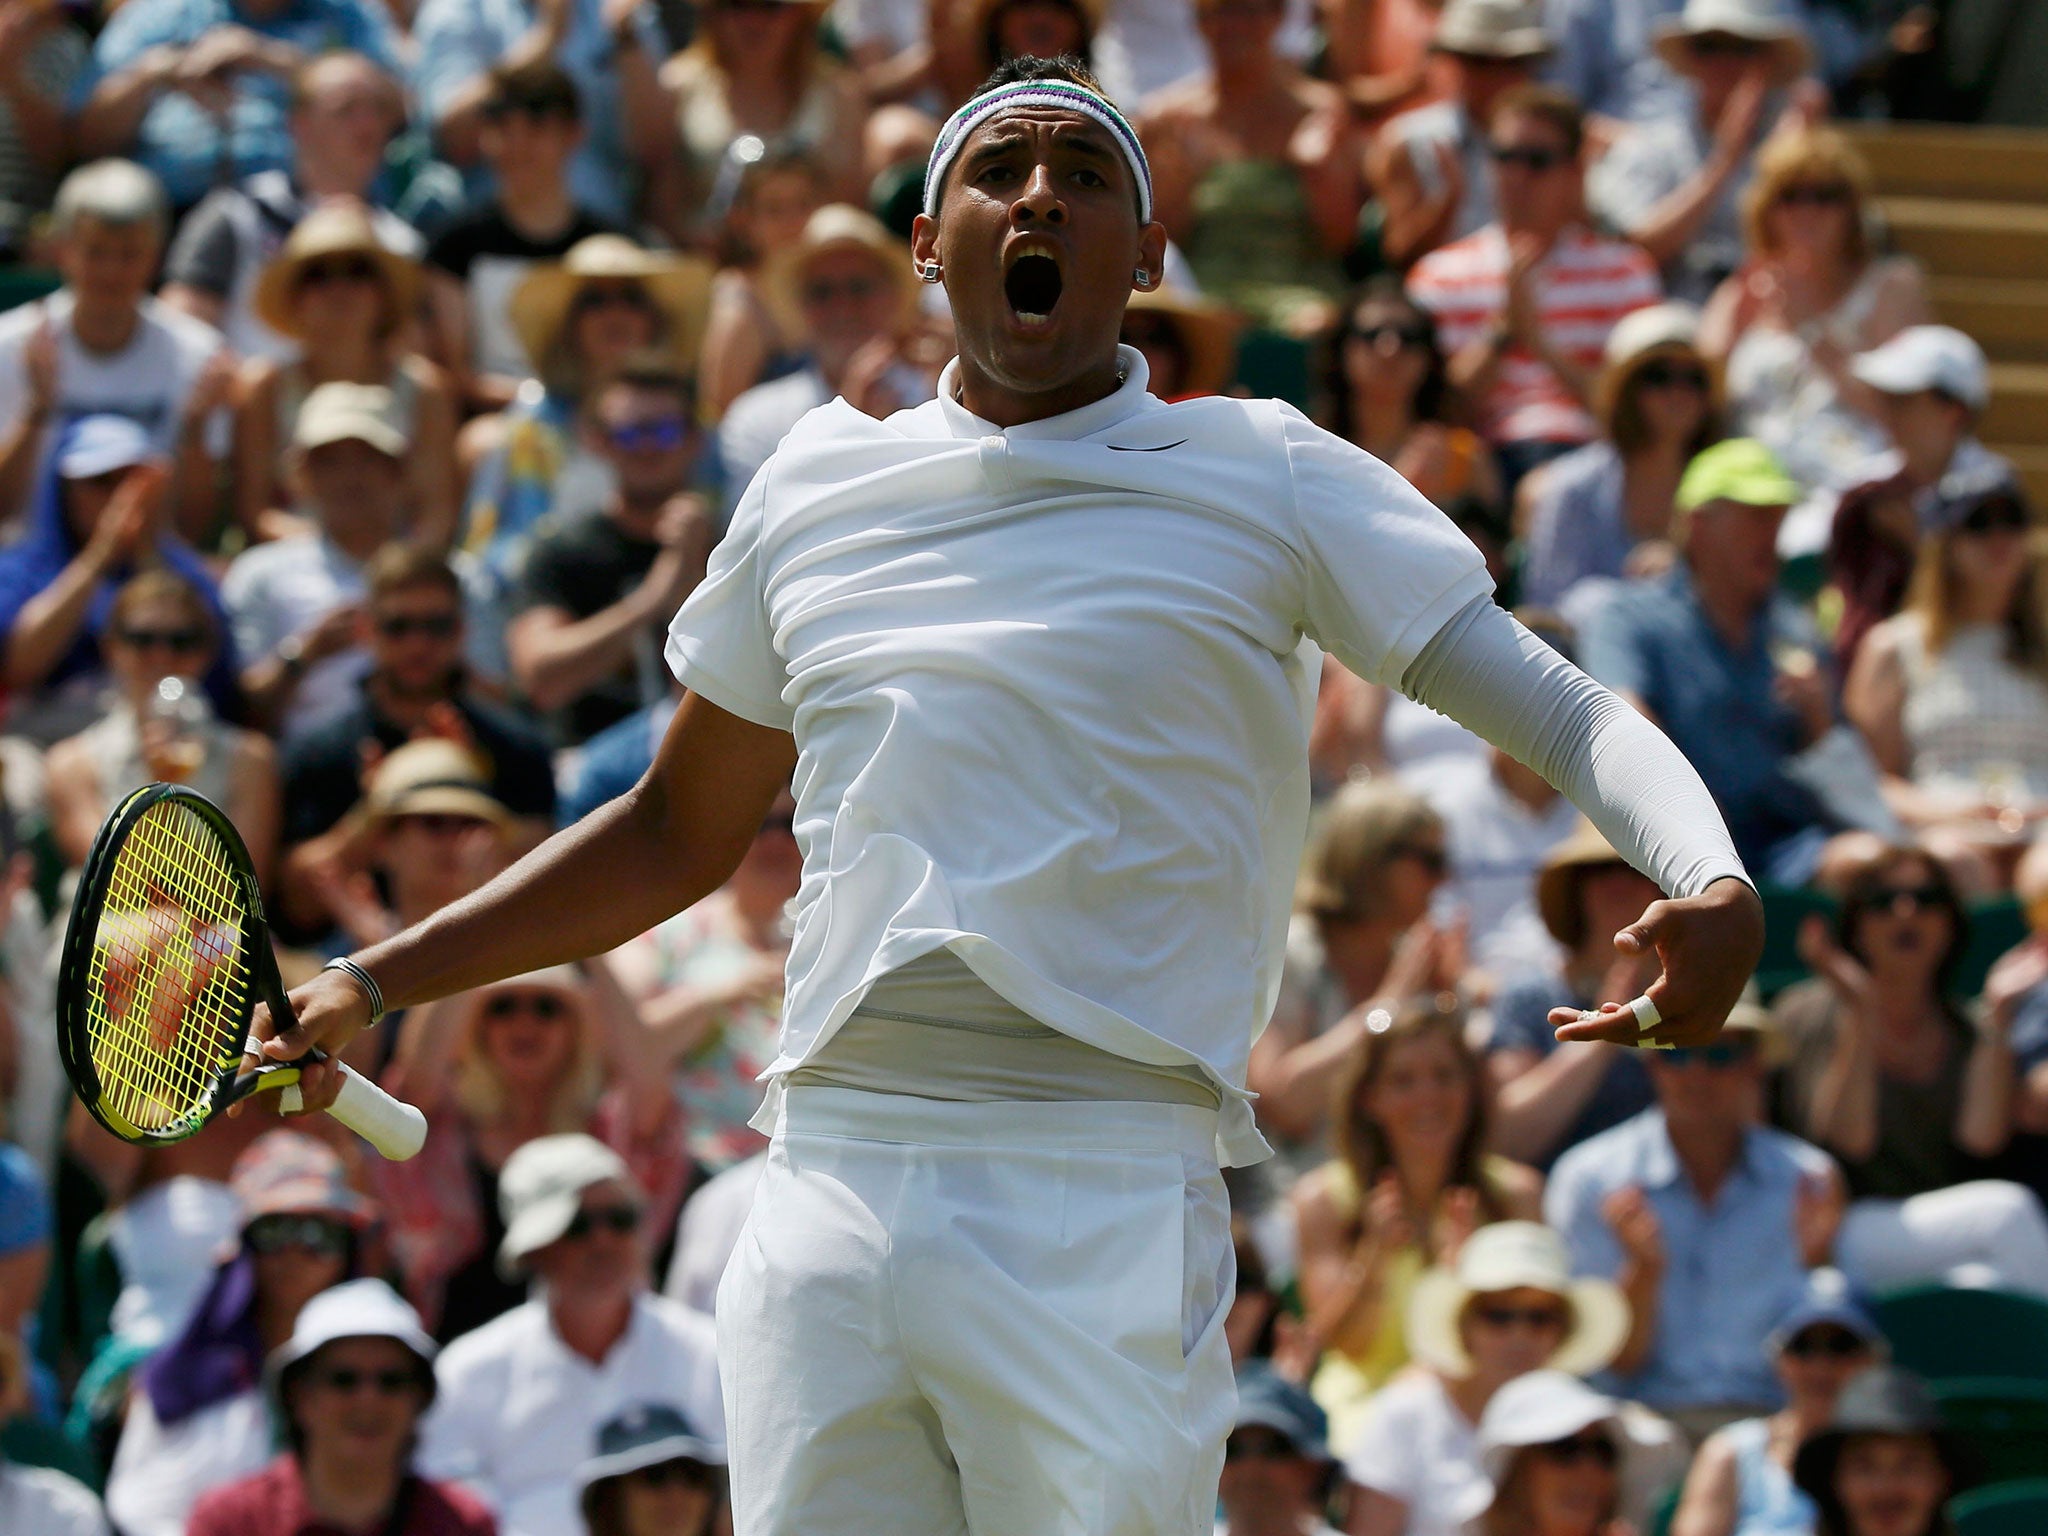 Australian Nick Kyrgios’s antics have attracted more attention than his tennis at Wimbledon